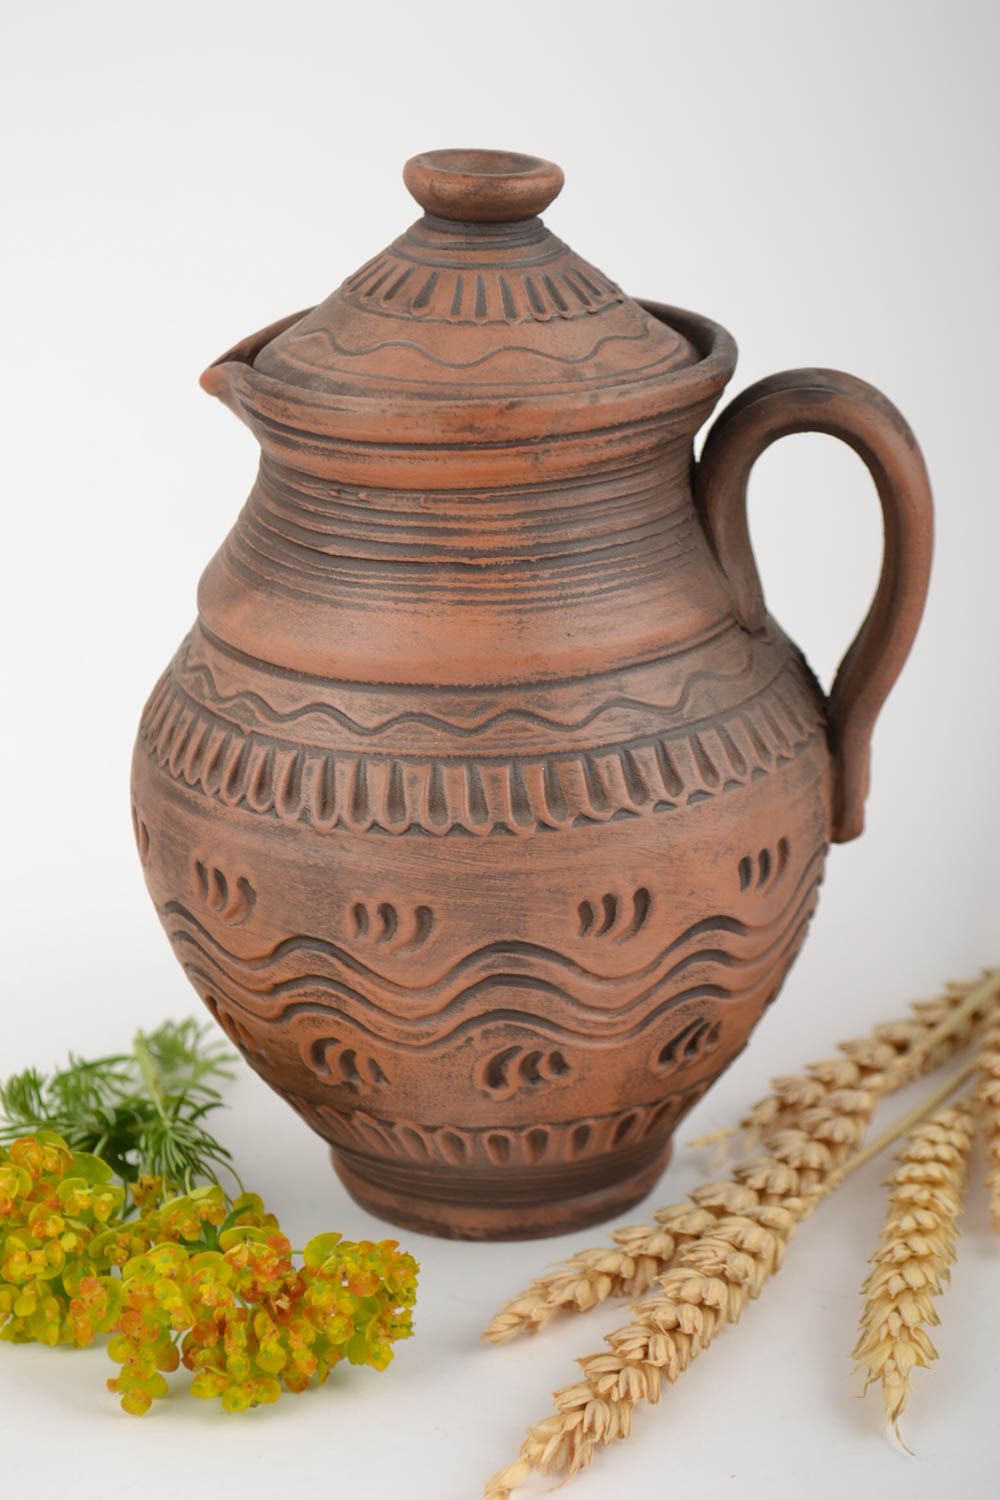 15 oz handmade ceramic brown pitcher with handle and lid 0,82 lb photo 1